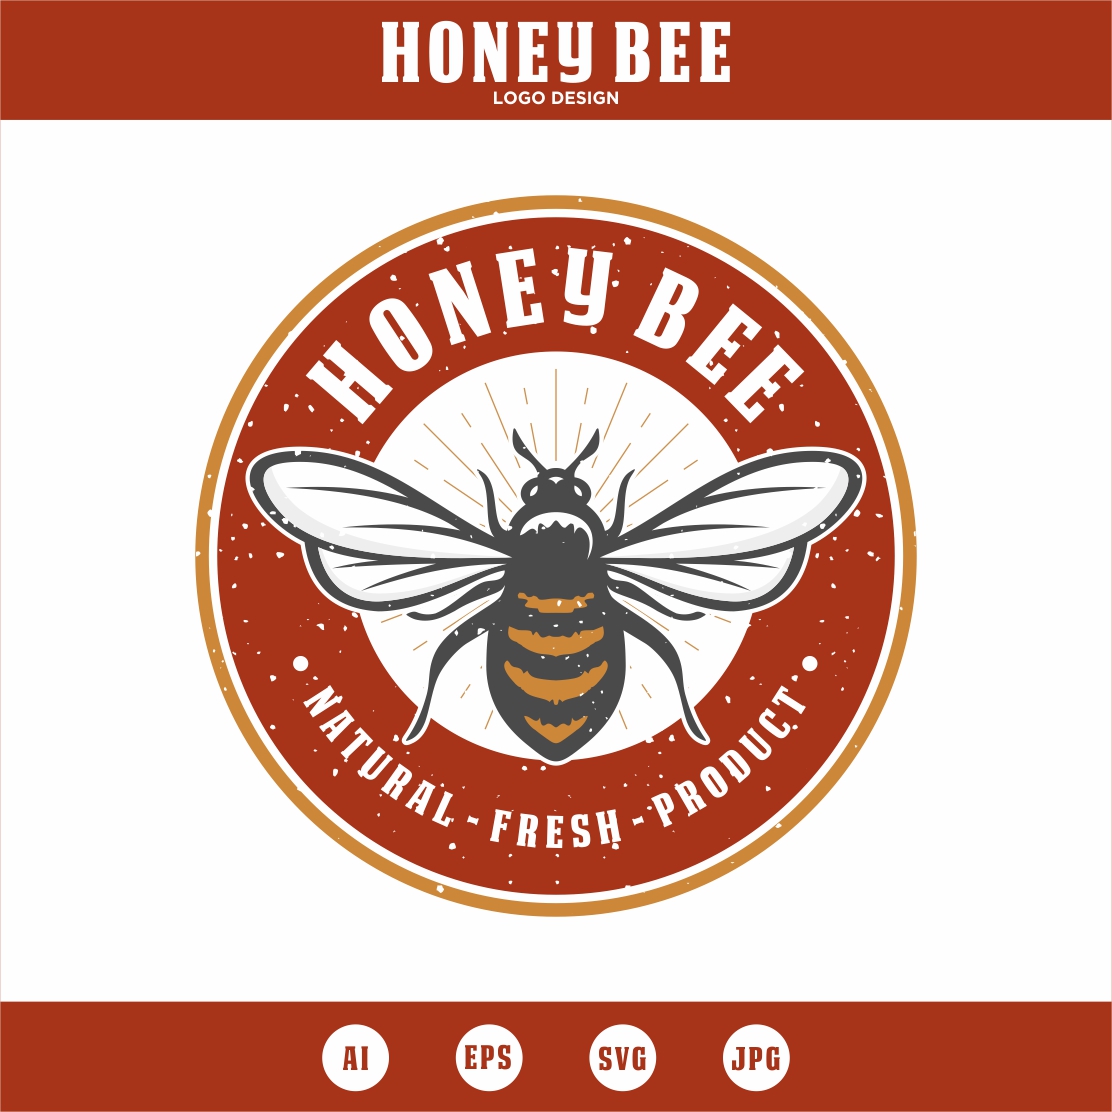 Honey Bee logo design - only 8$ cover image.